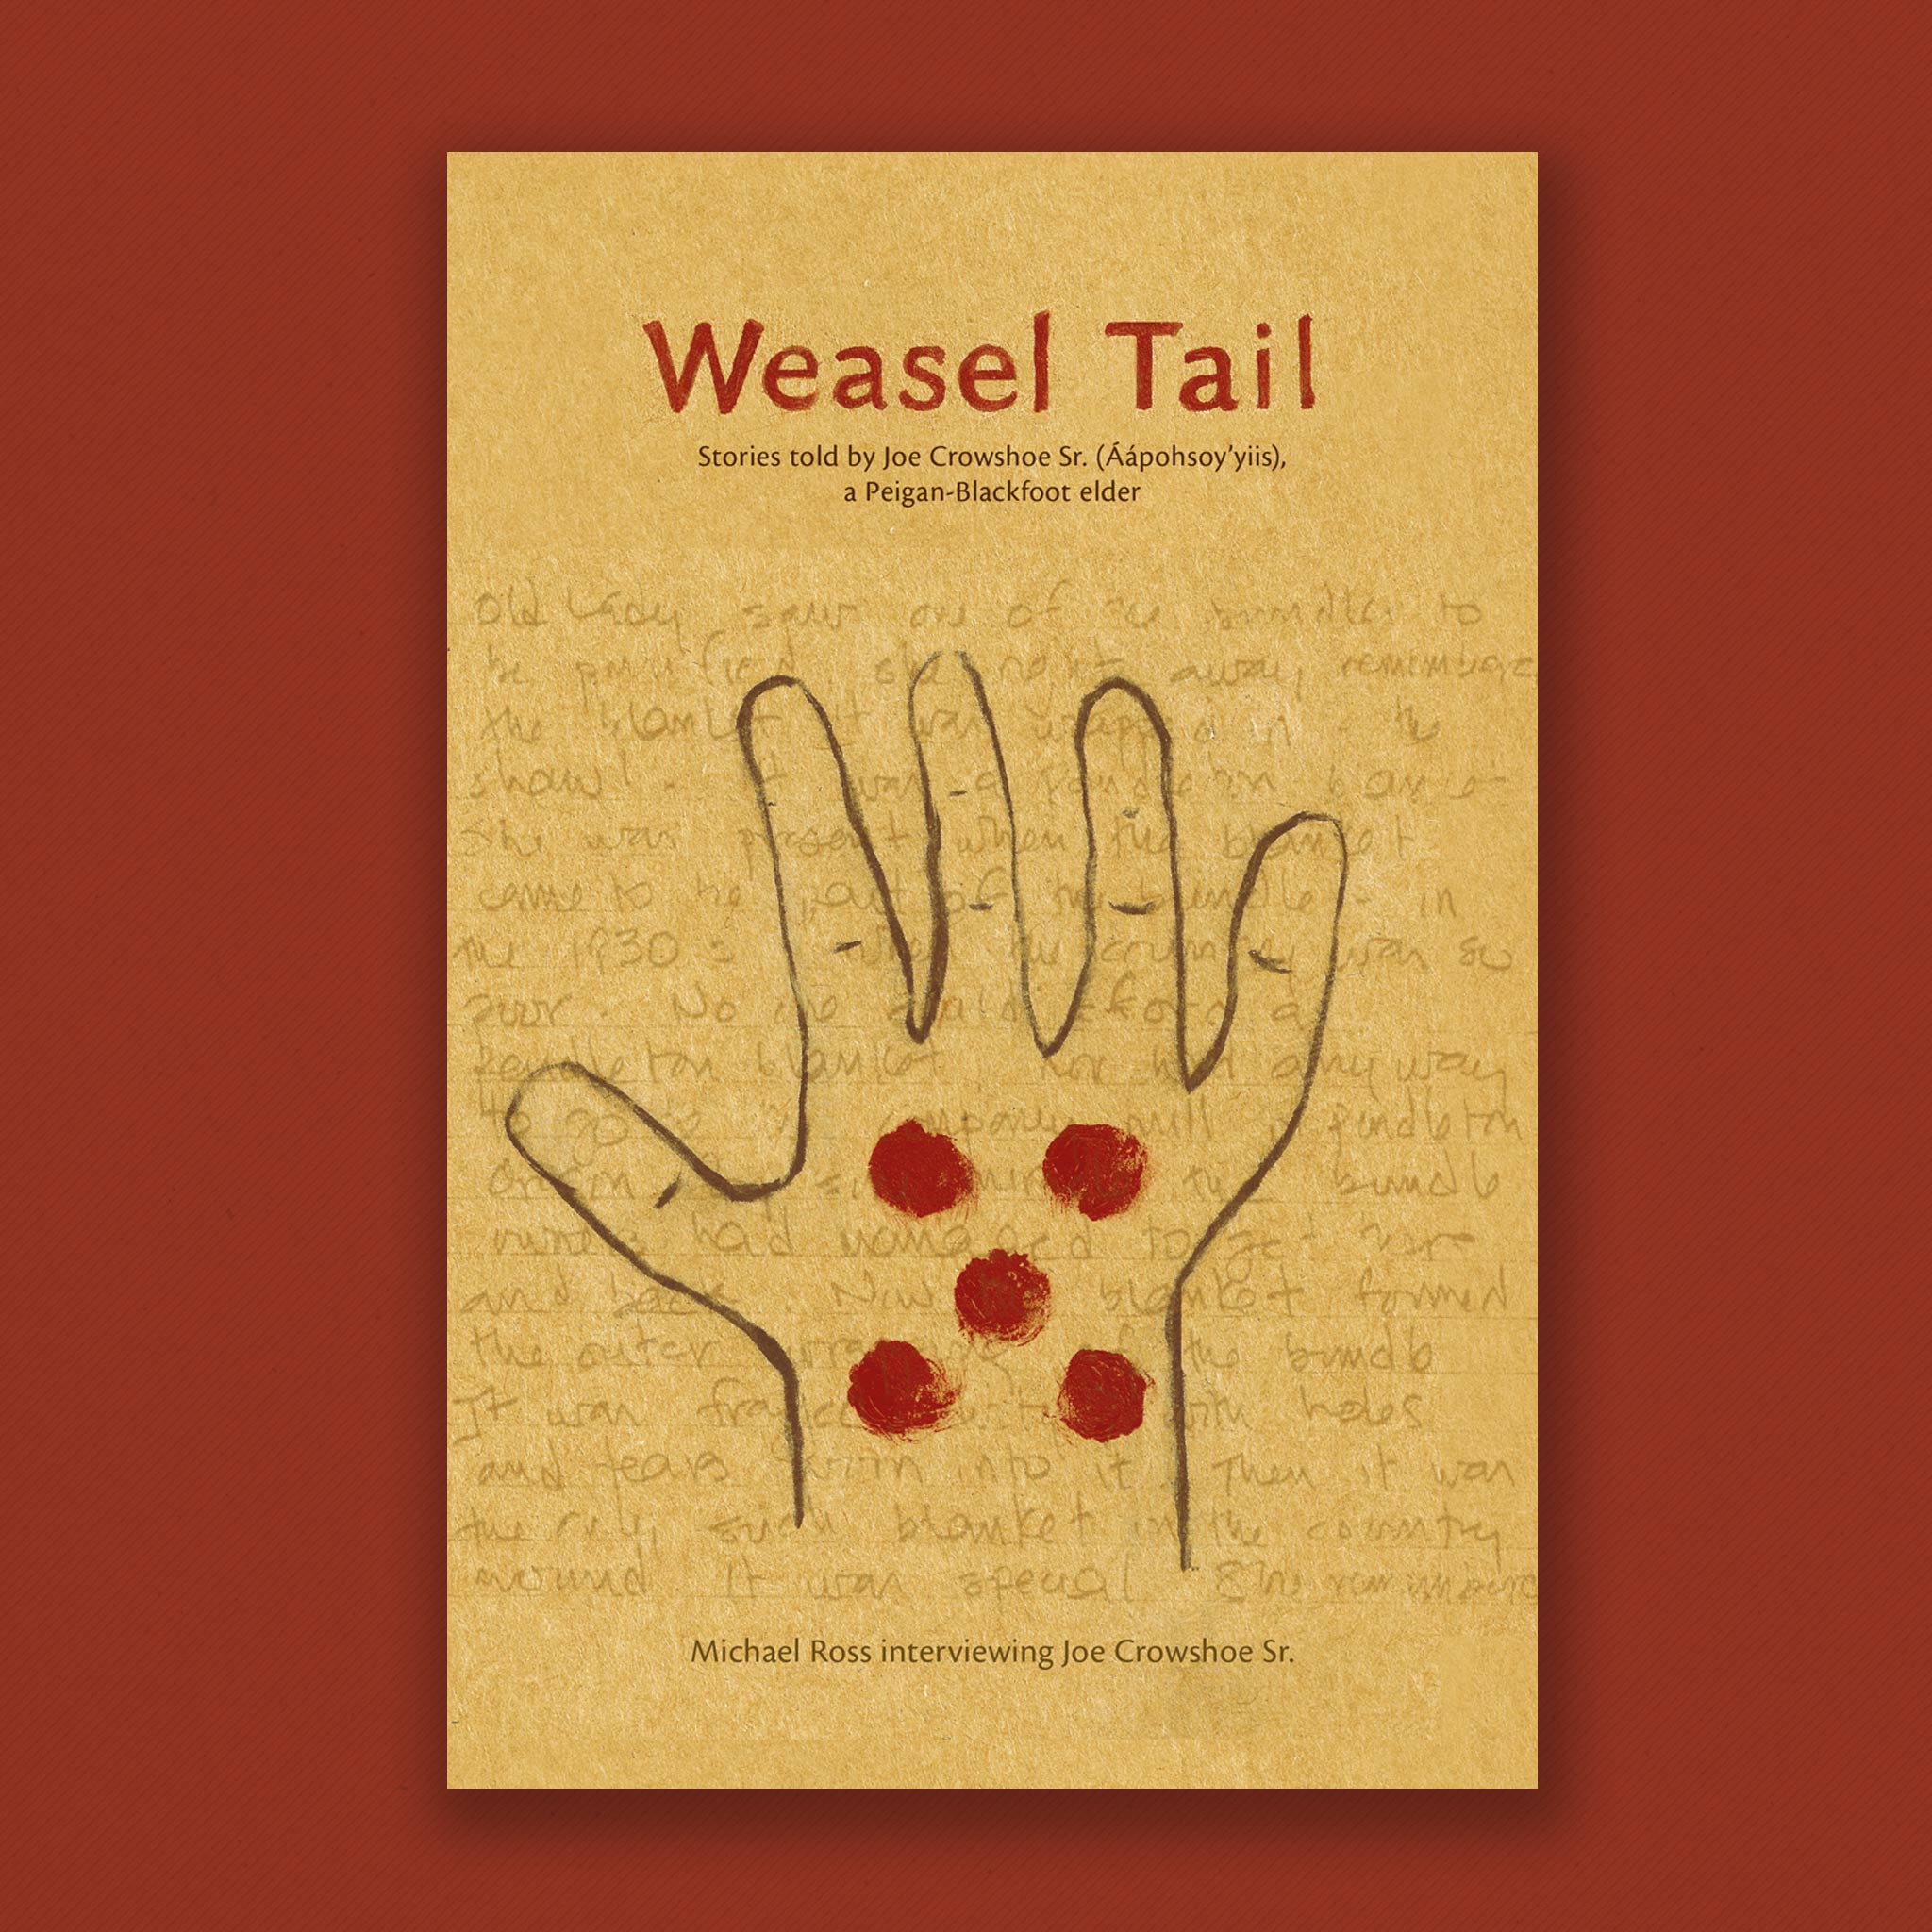 Weasel Tail